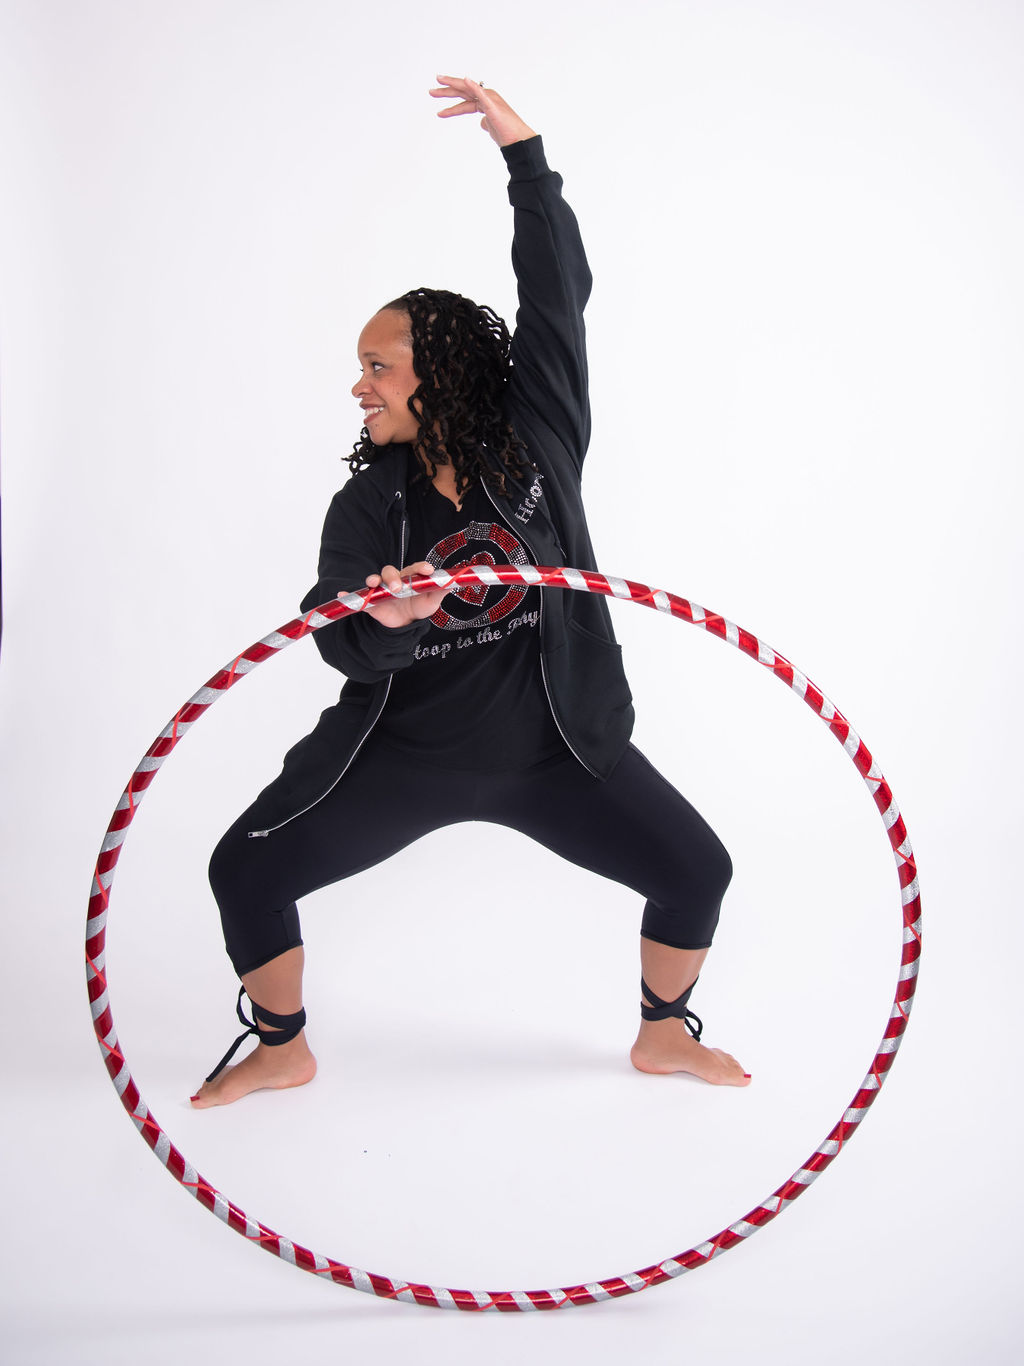 Join the online hula hoop fitness community brought to you by Hoop to the Rhythm®